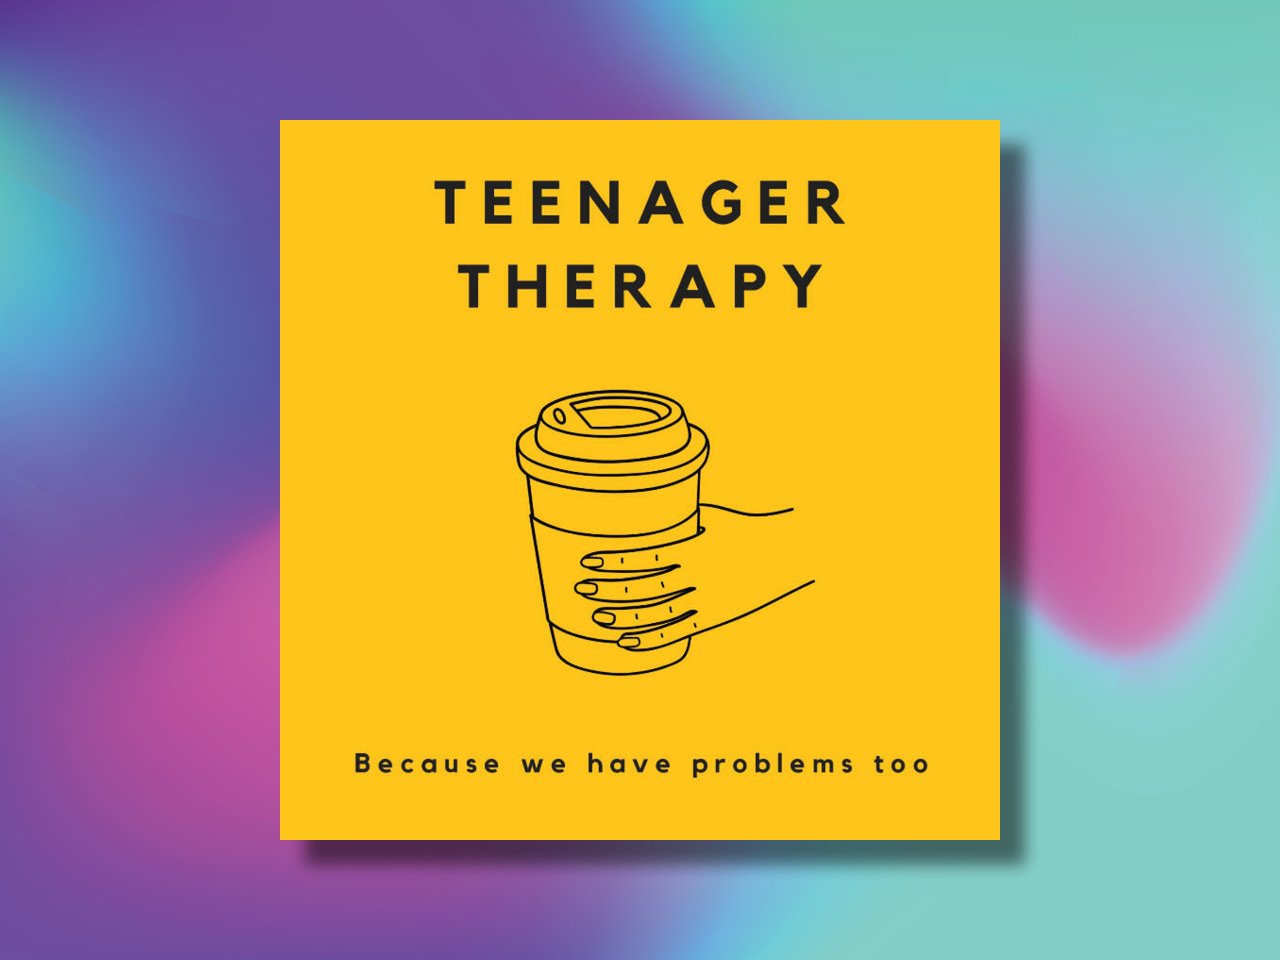 The logo of Teenager Therapy